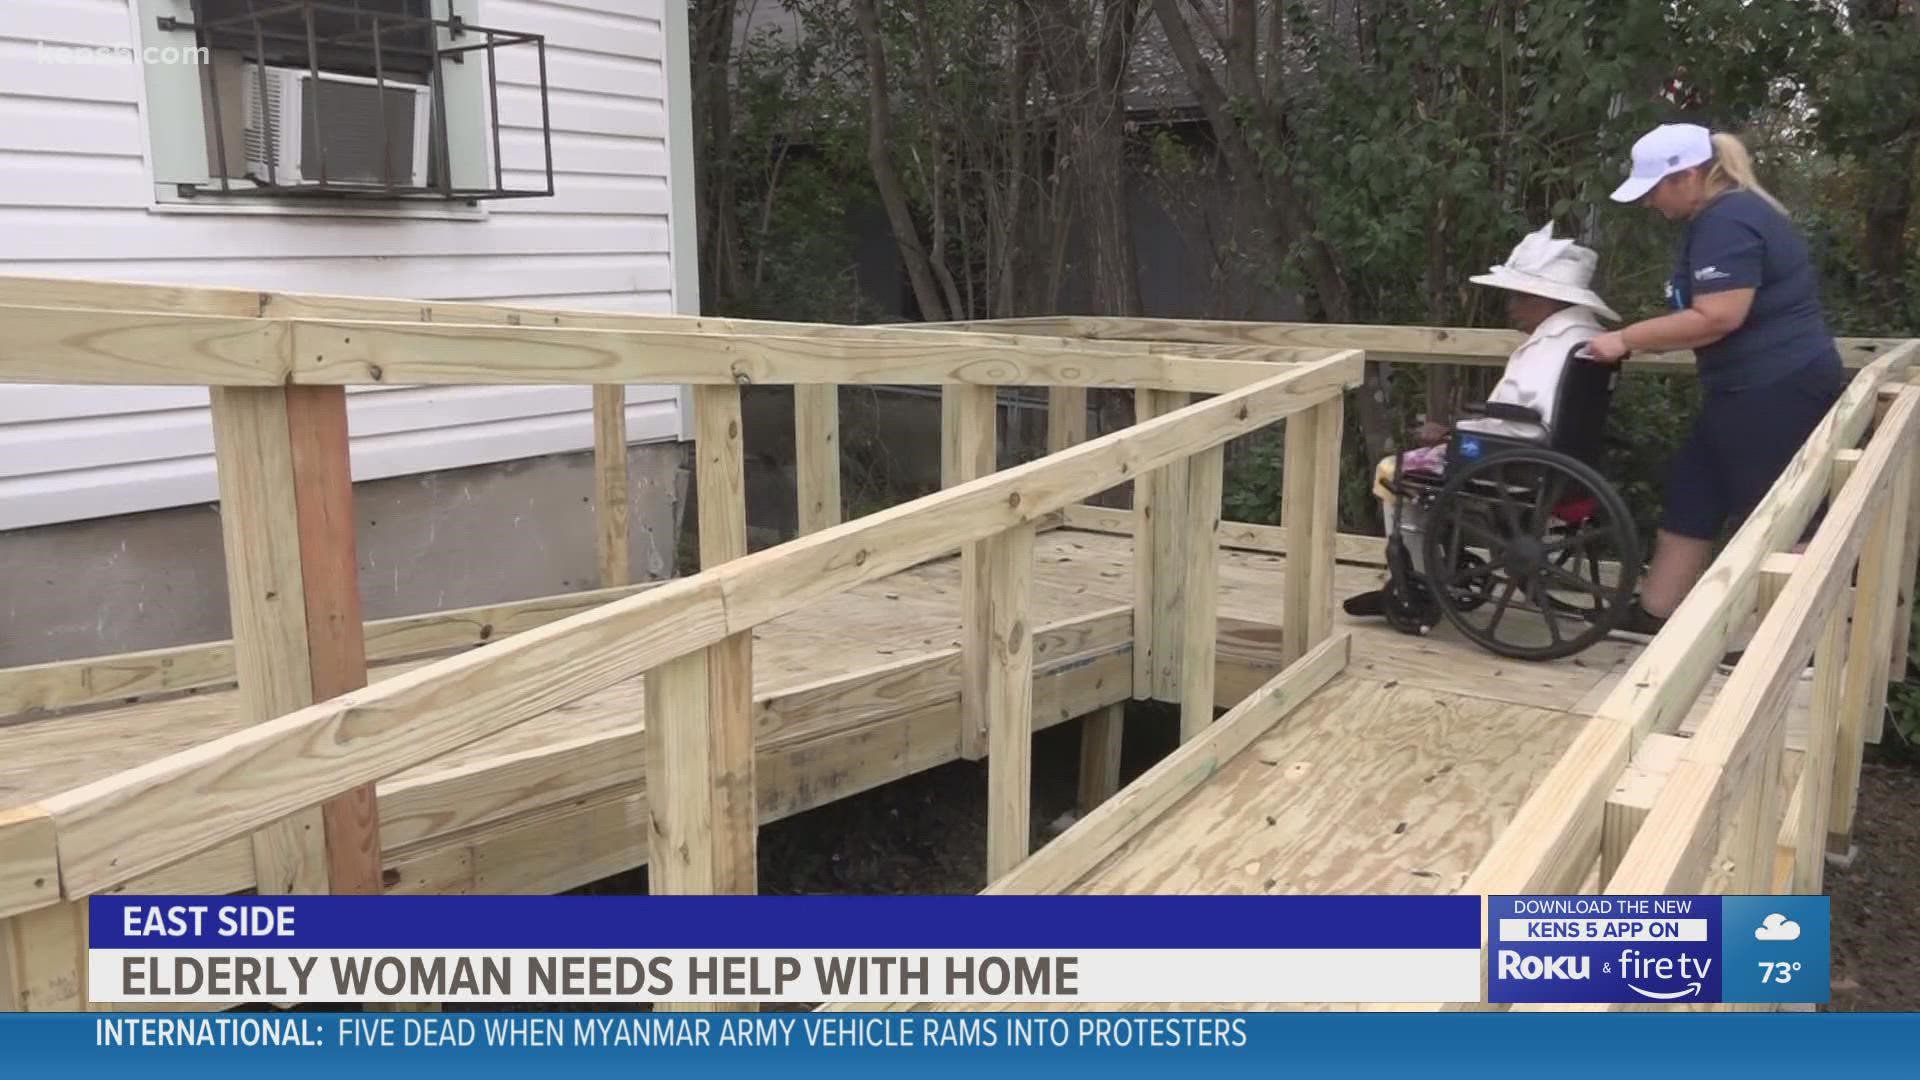 95-year-old Mary Green and her full-time caretaker say they were grateful to get a brand new ramp at no cost, and its one of several needed repairs on her home.